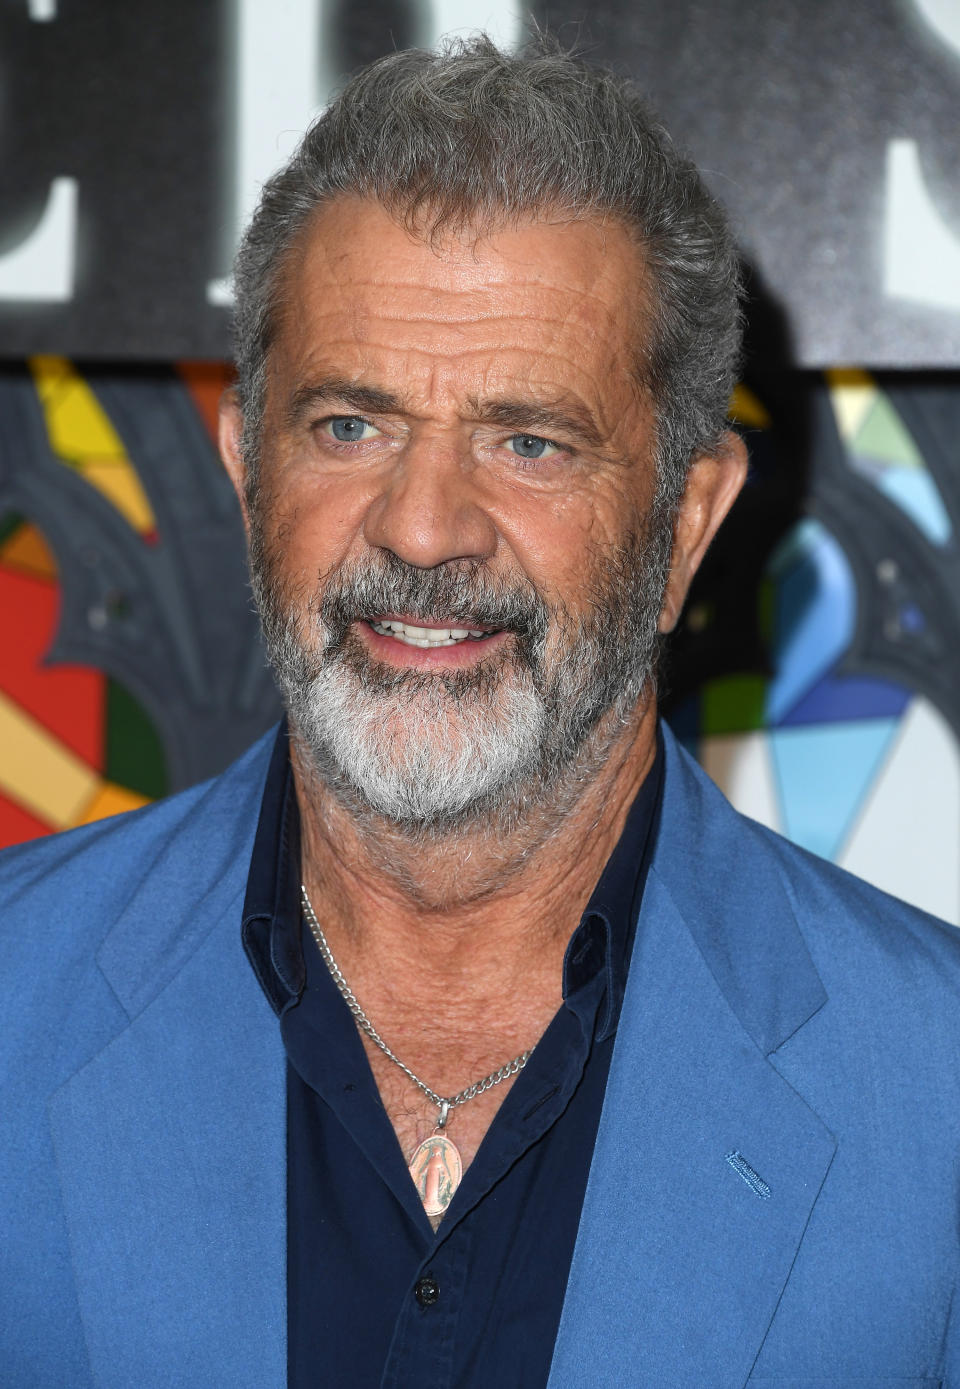 Mel Gibson poses at the Columbia Pictures' "Father Stu" Photo Call at The London West Hollywood